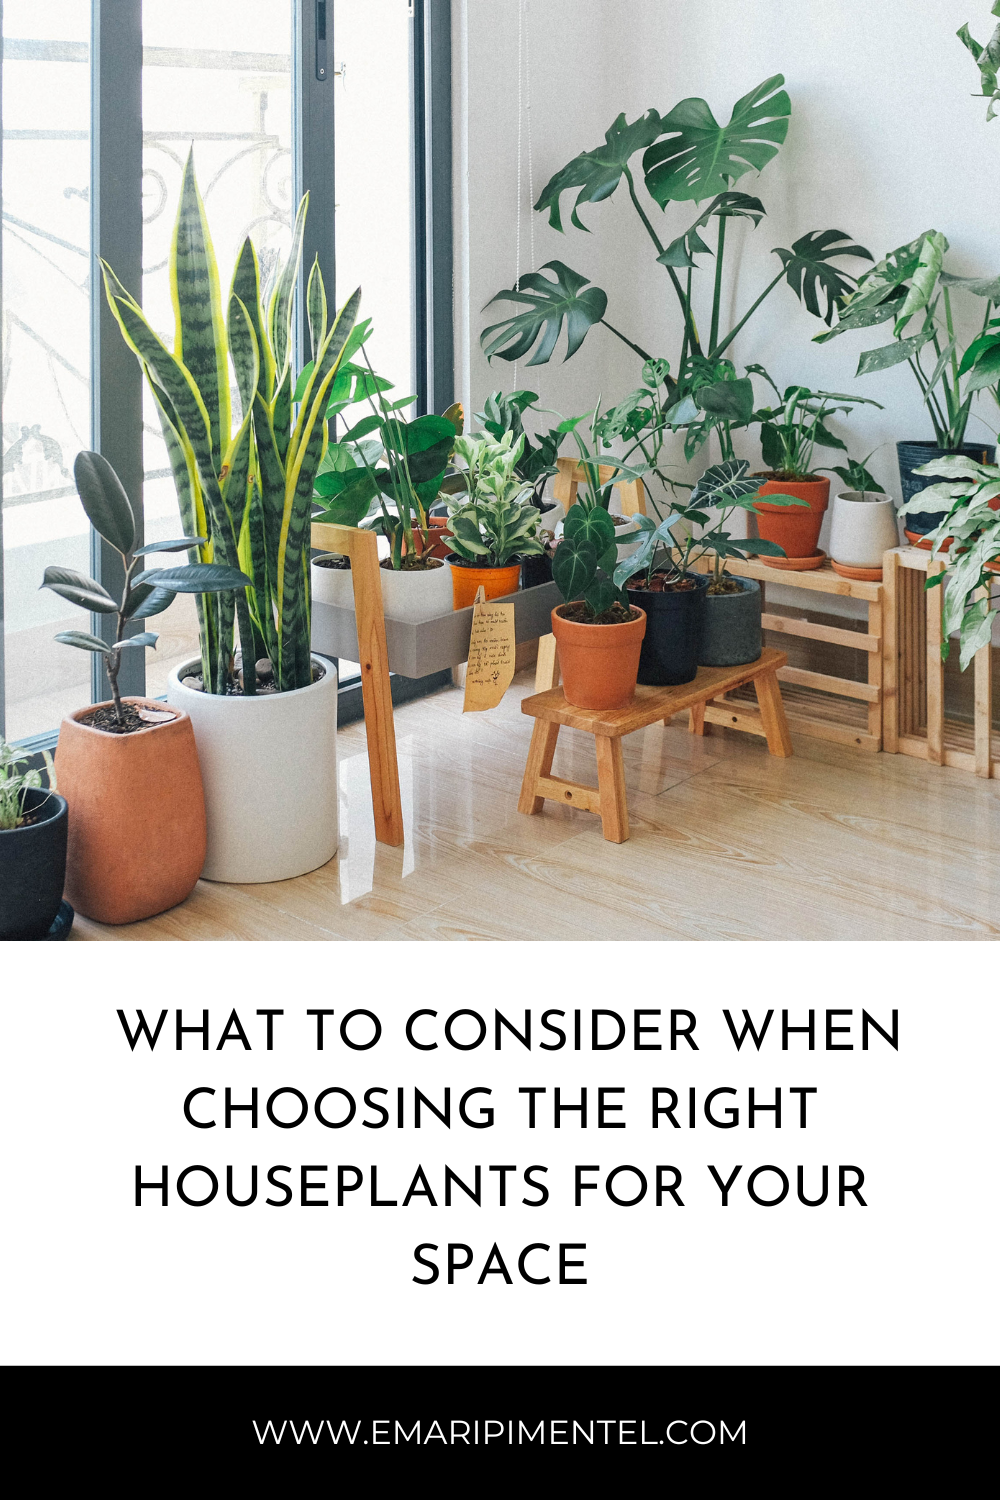 In my opinion, indoor plants are an absolute game-changer for decoration. I  believe they not only enhance the aesthetics but also bring a refreshing  vibe to any space. Additionally, taking care of